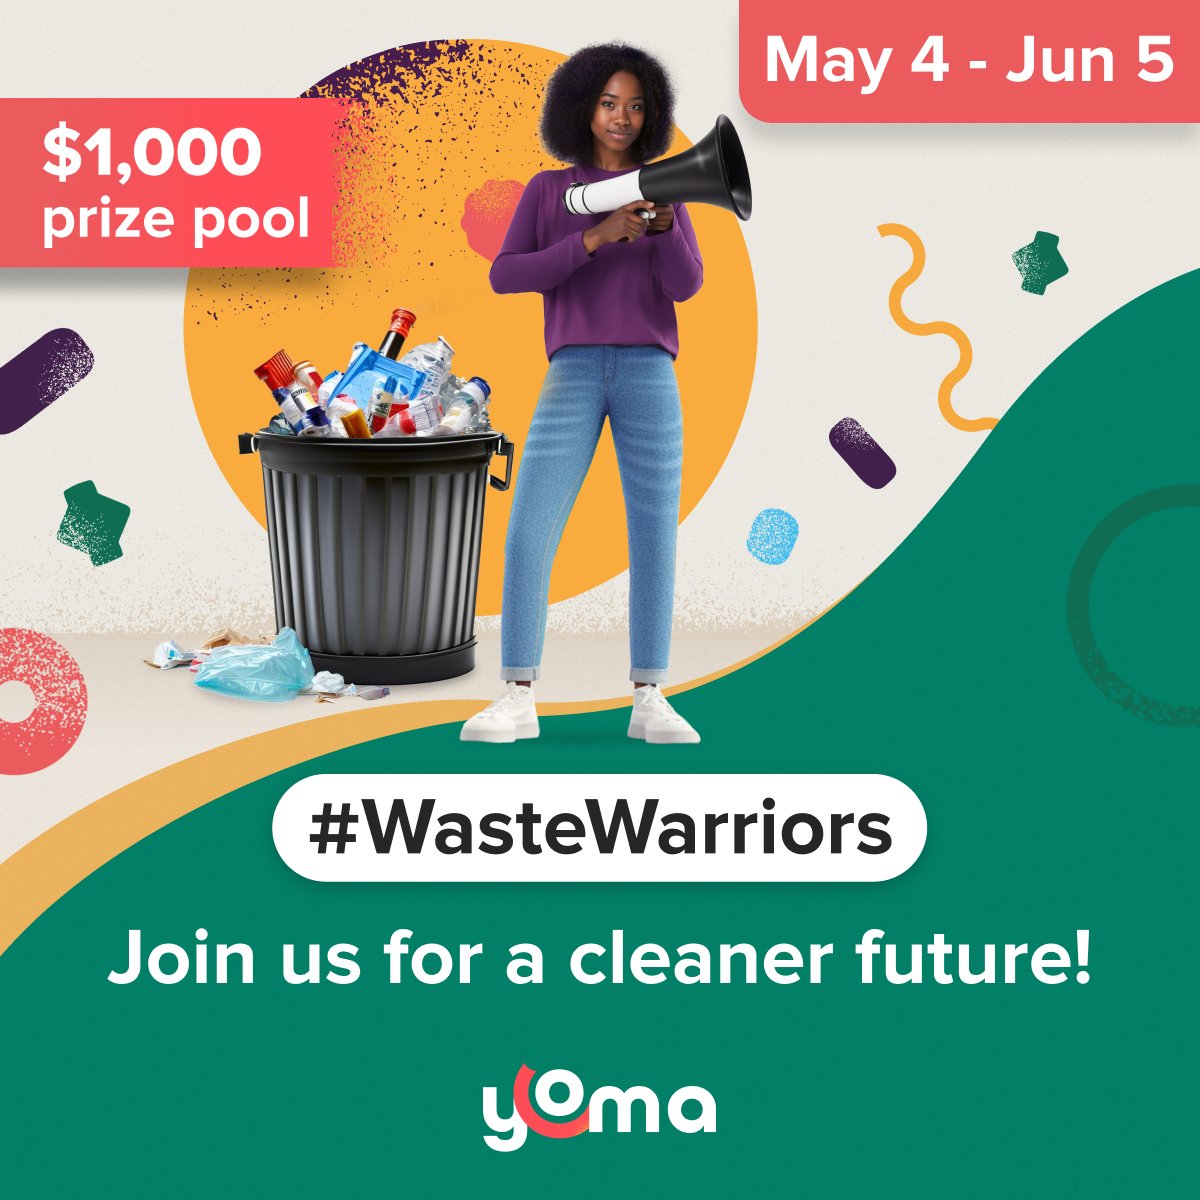 Join the #WasteWarriors challenge brought to you by YOMA and Goodwall and share your ideas for a cleaner, greener world.
Signup:yoma.africa